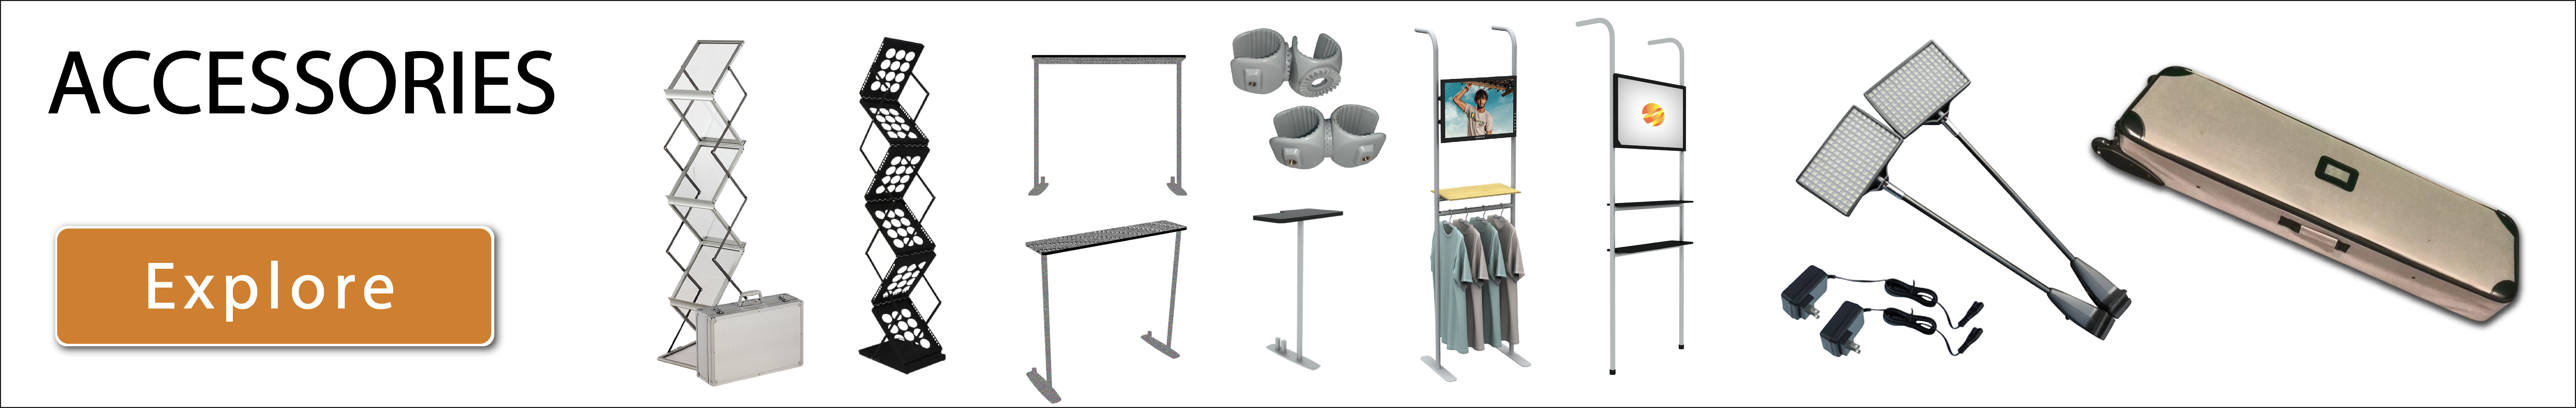 Tension Fabric Display Accessories